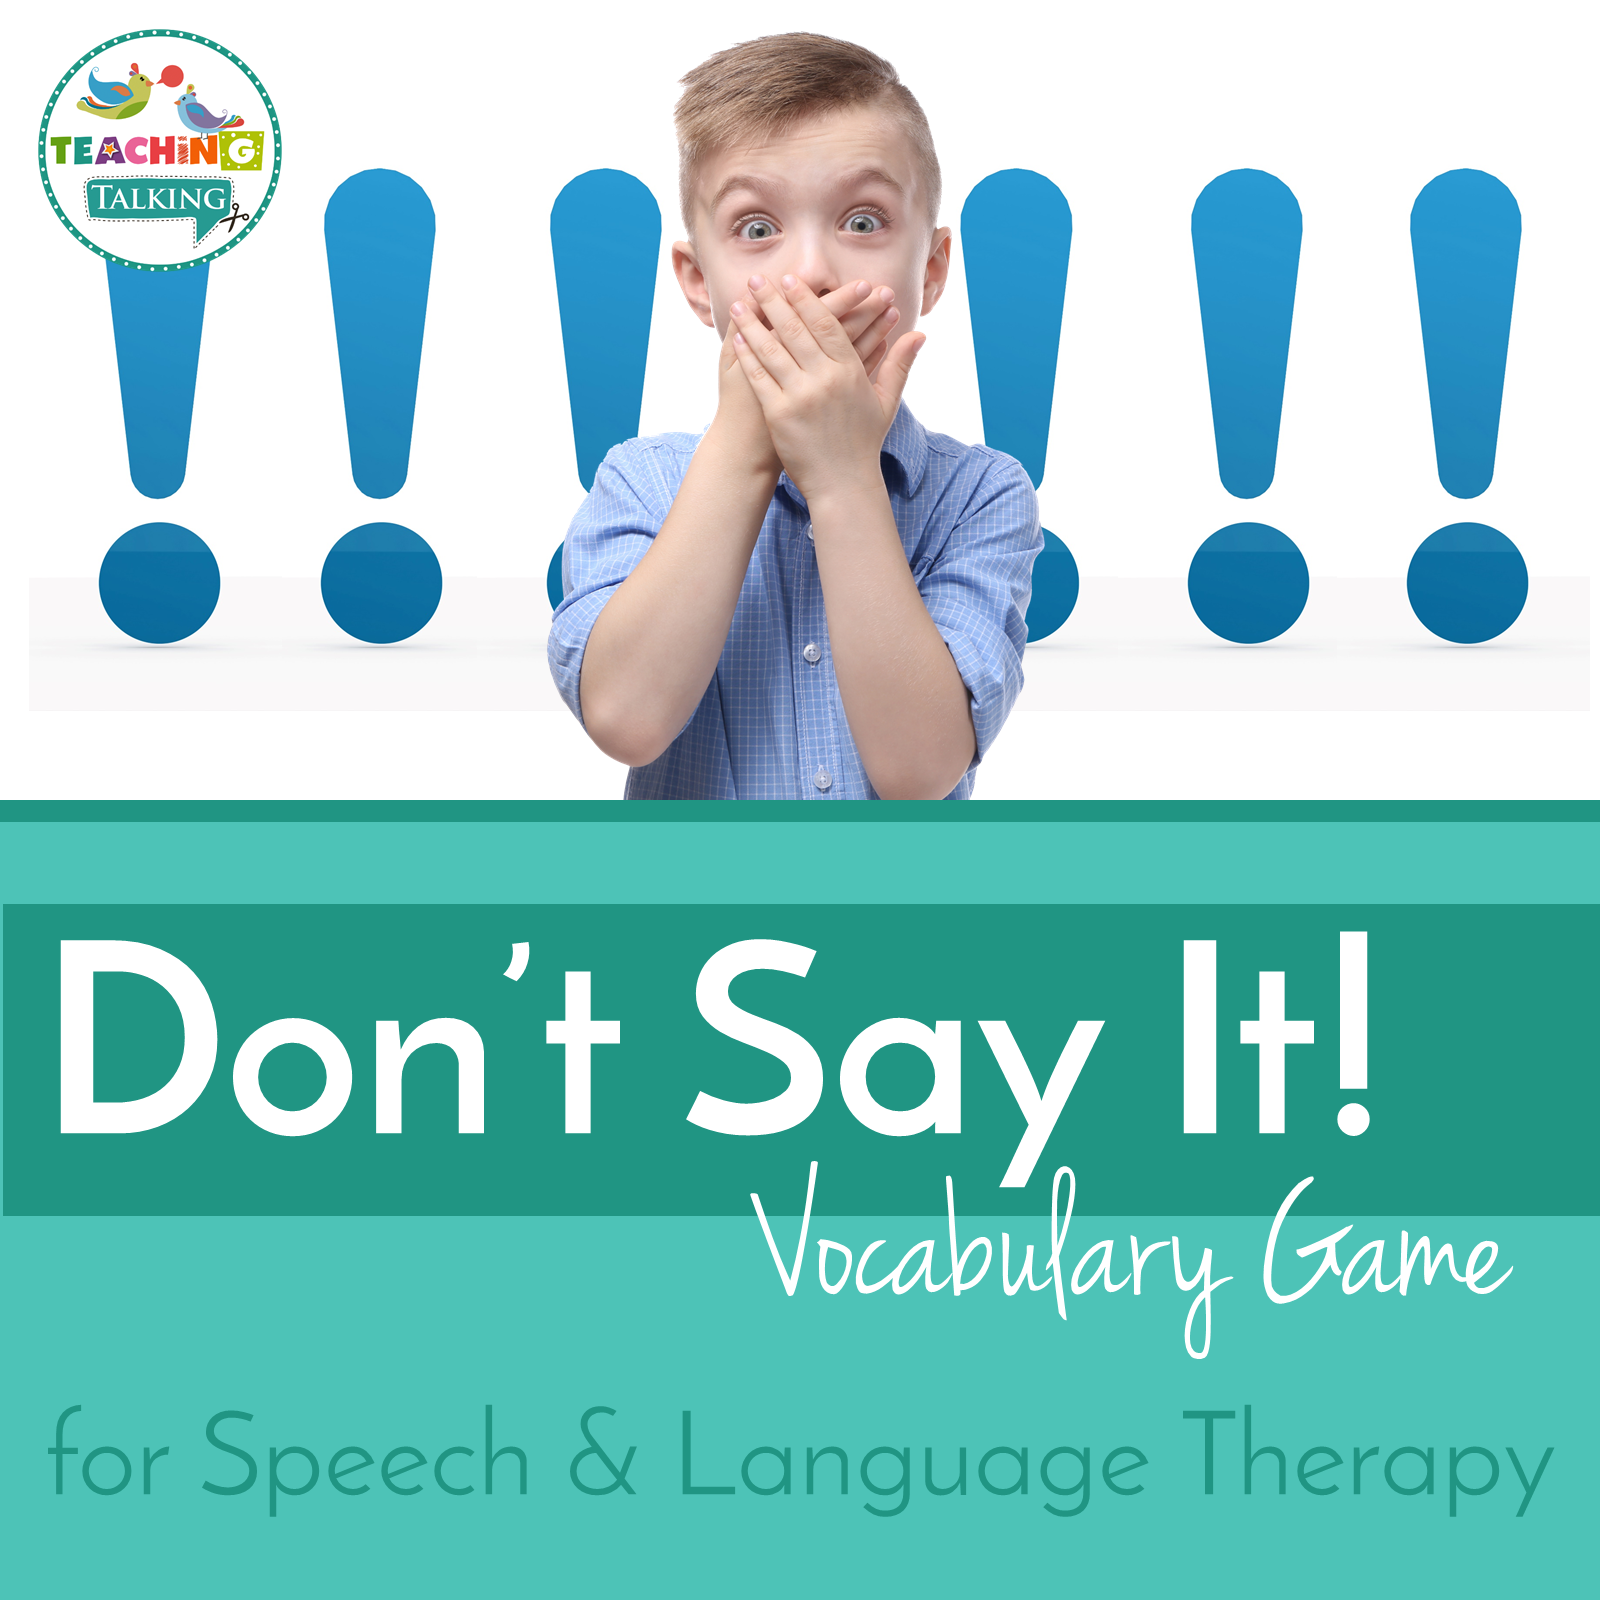 Need a Quick Game Using Tongue Depressors? - Adventures in Speech